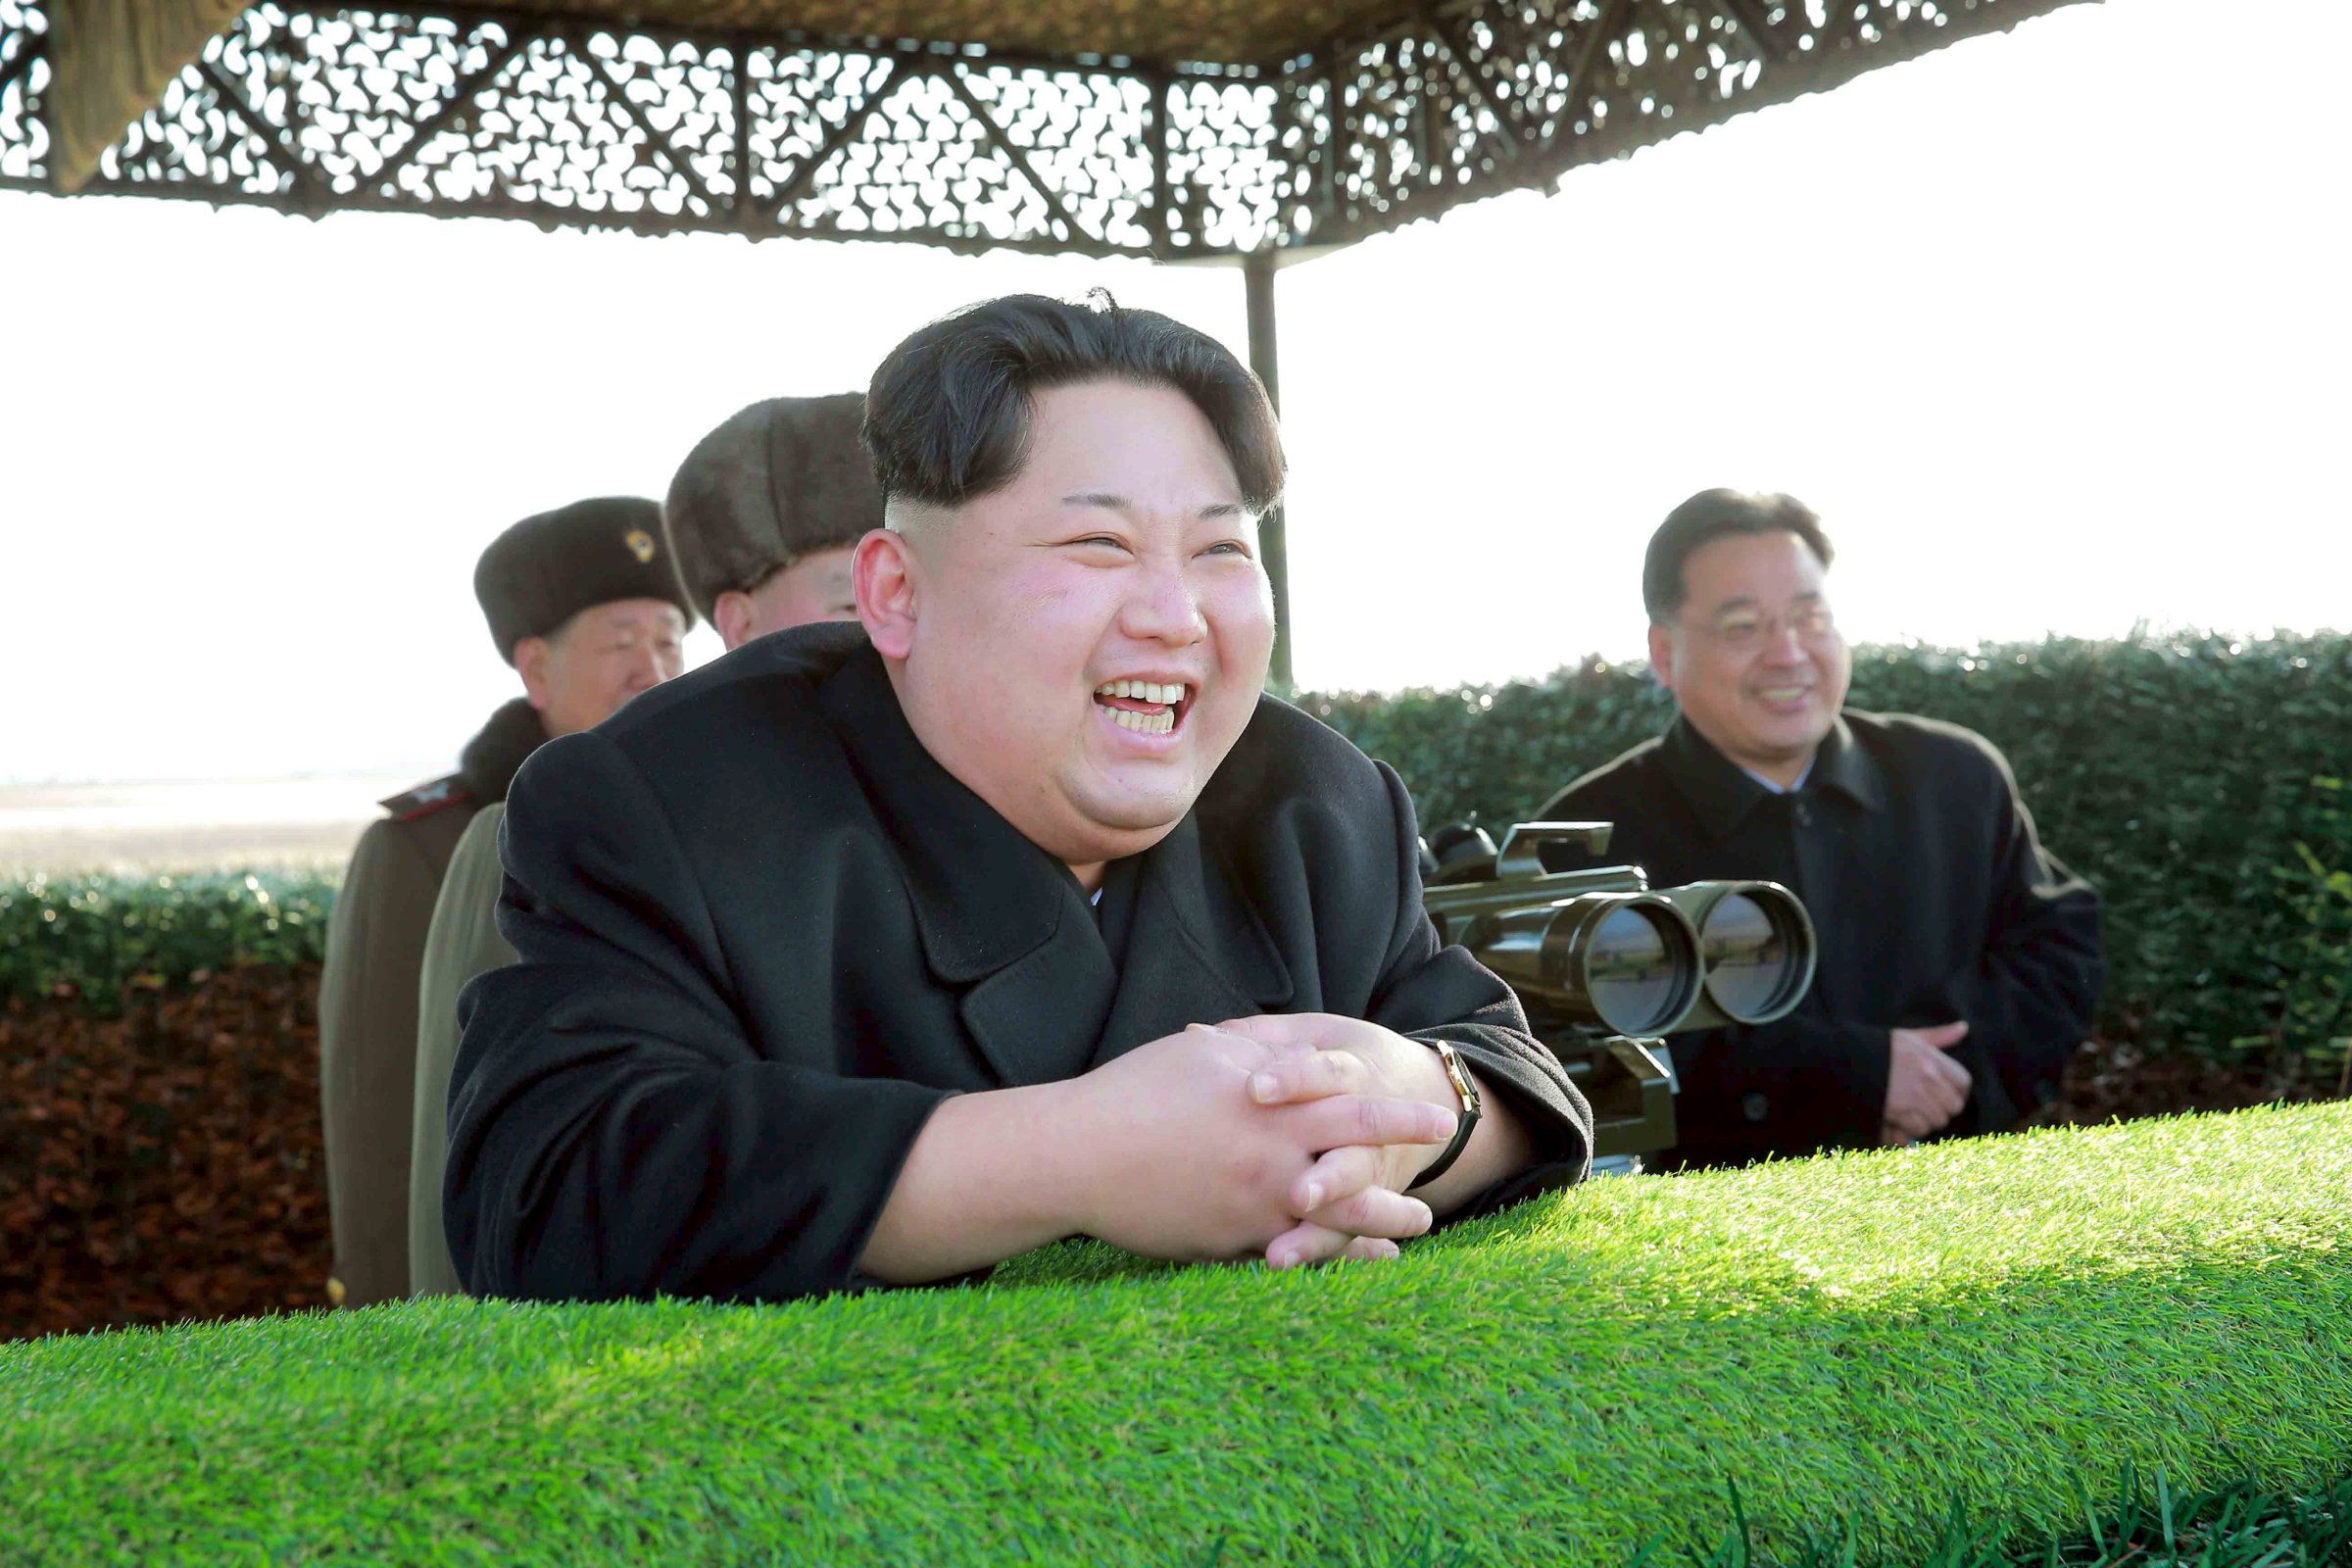 North Korean leader Kim Jong Un reacts during a test-fire of an anti-tank guided weapon in this undated photo released by North Korea's Korean Central News Agency (KCNA) in Pyongyang